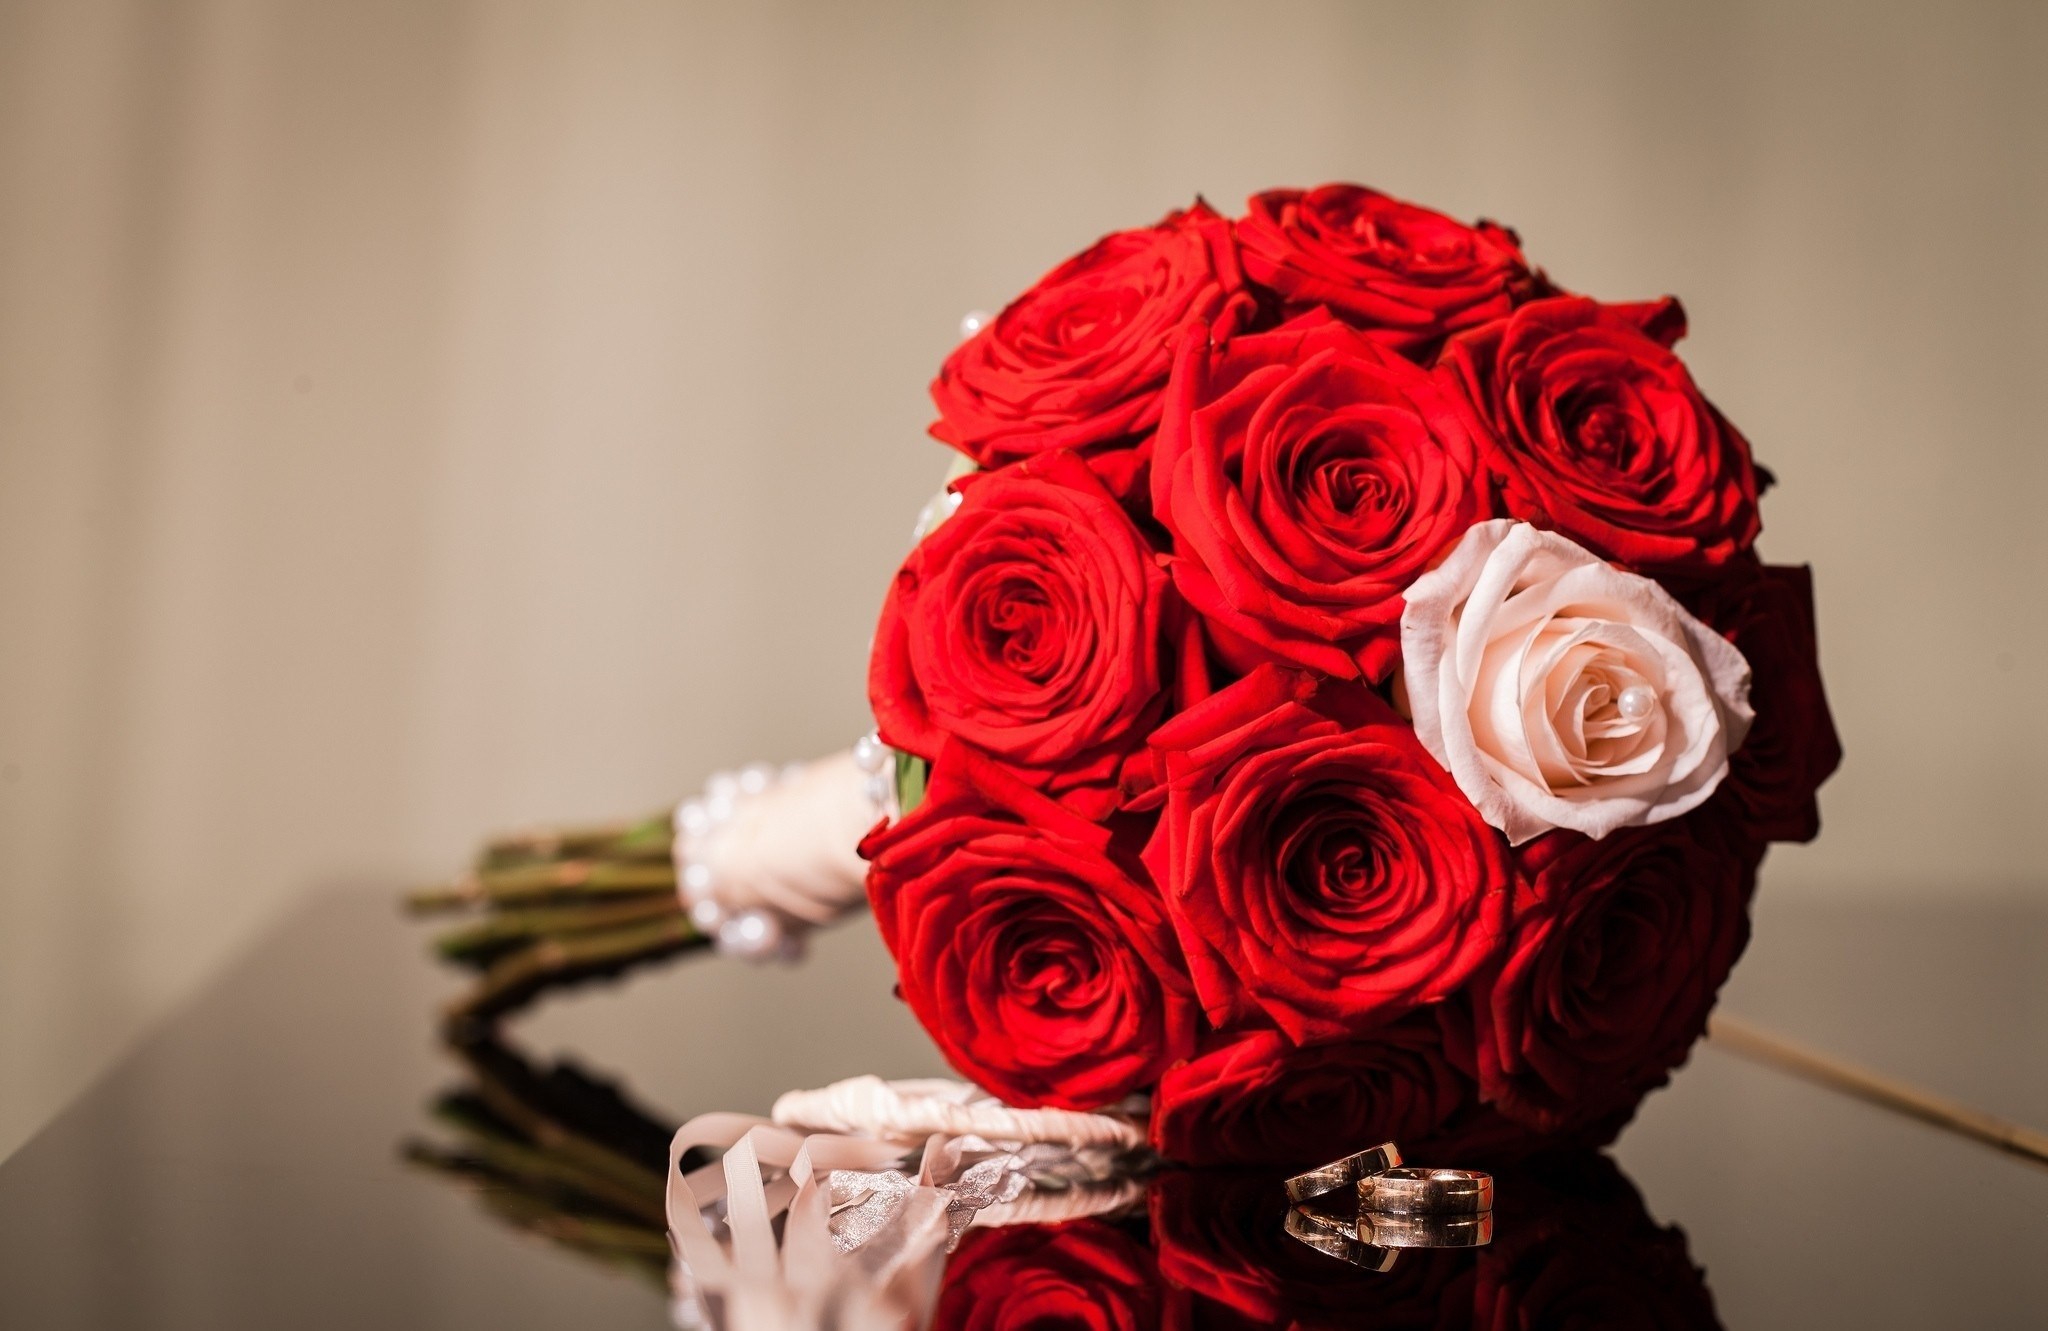 Flowers Red Rings Roses Bouquet Wallpaper - Red Rose Wallpaper Of Flowers -  2048x1331 Wallpaper 